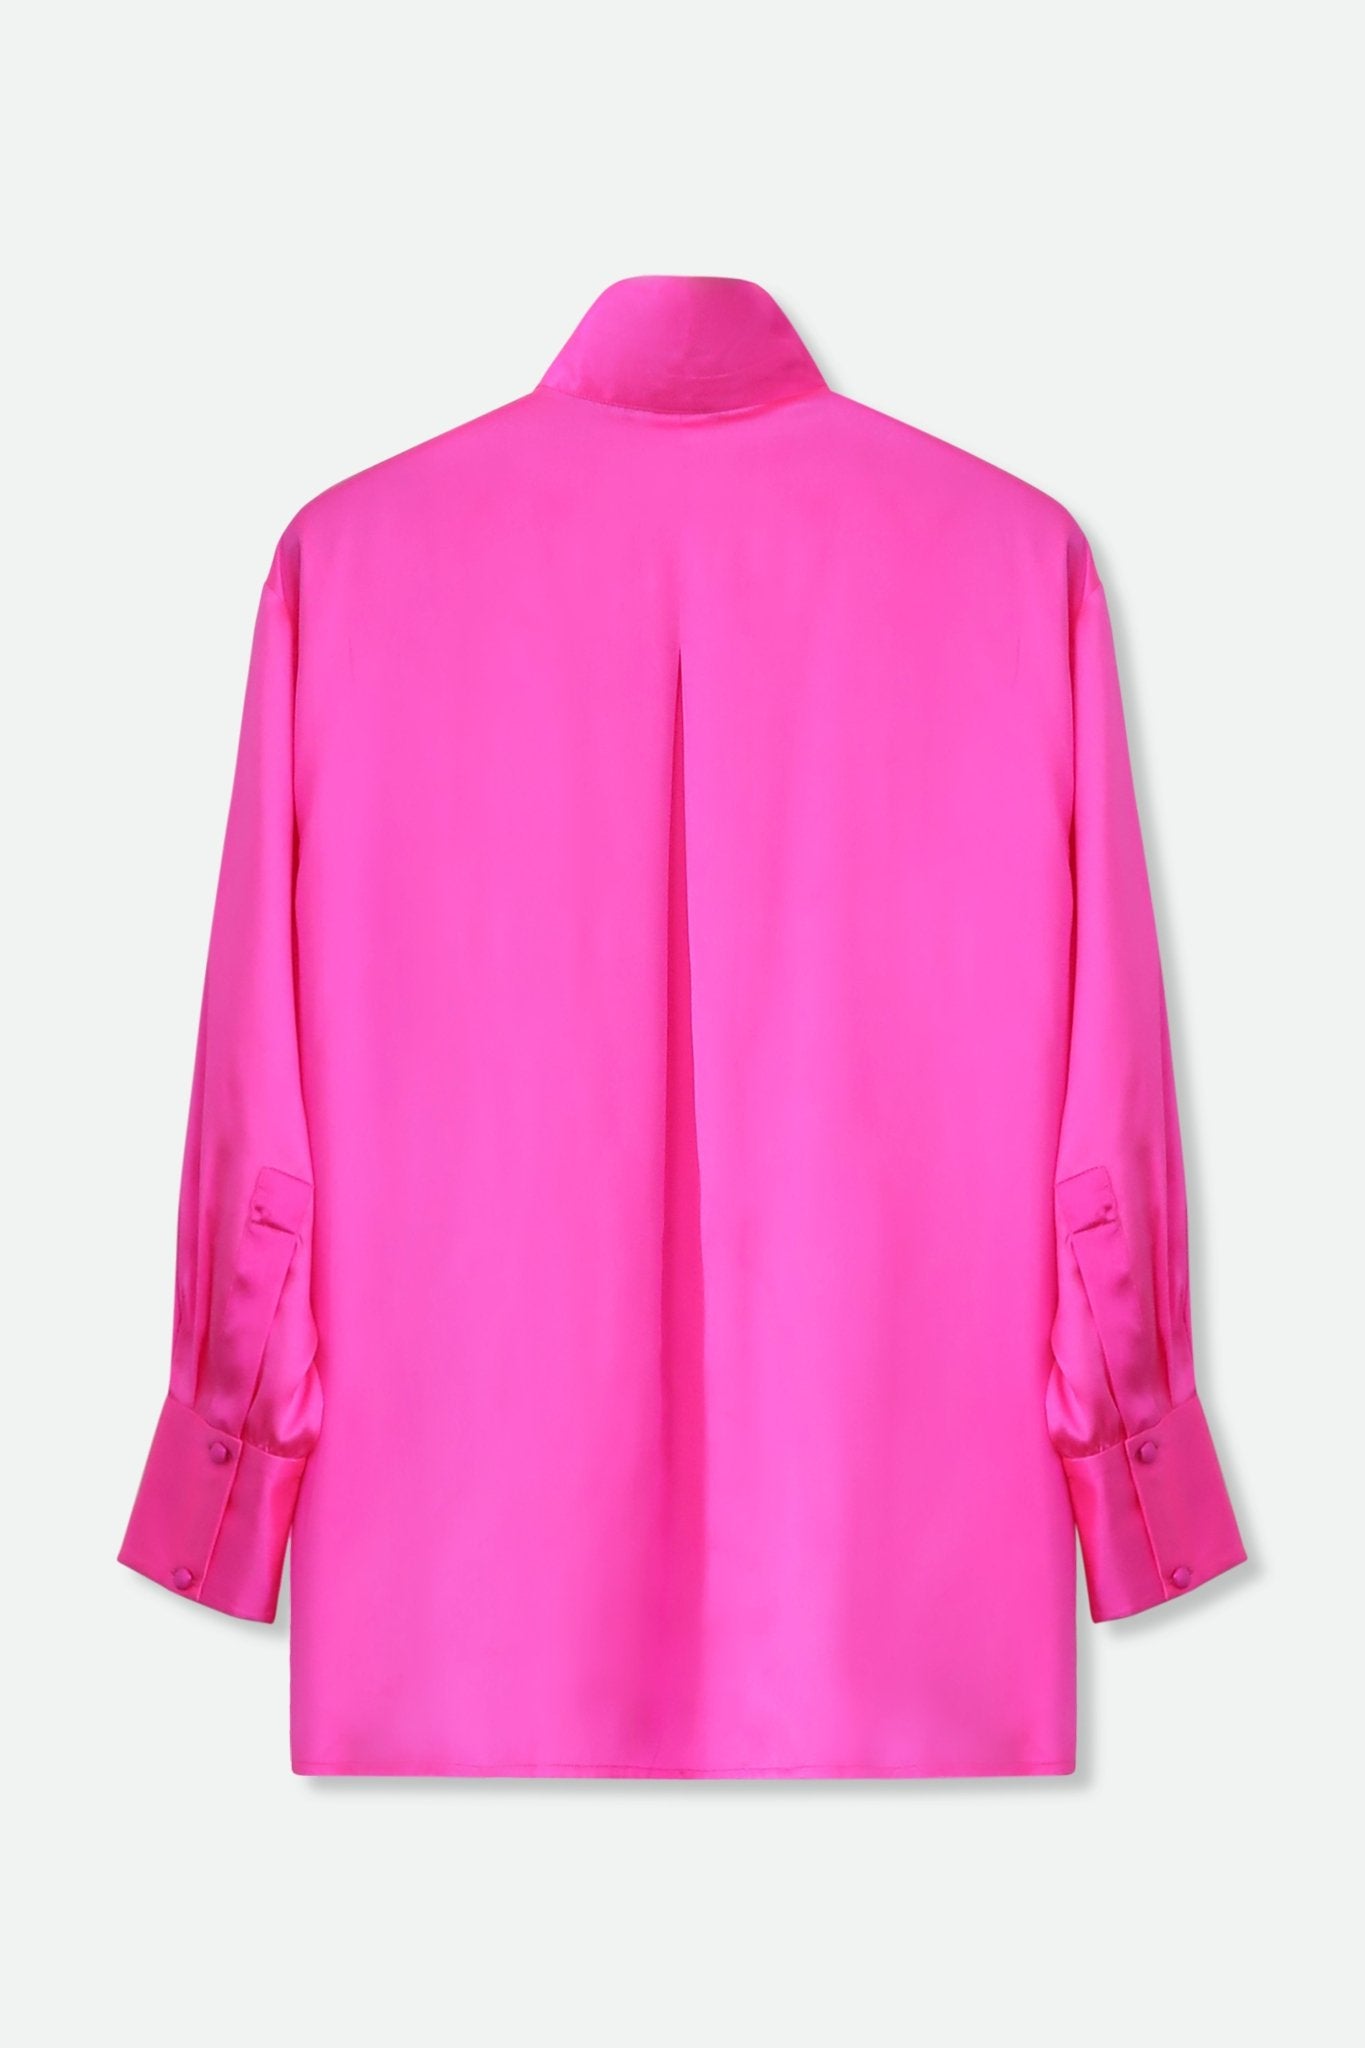 ADRIA SHIRT IN STRETCH SILK CHARMEUSE, HOT PINK - Jarbo